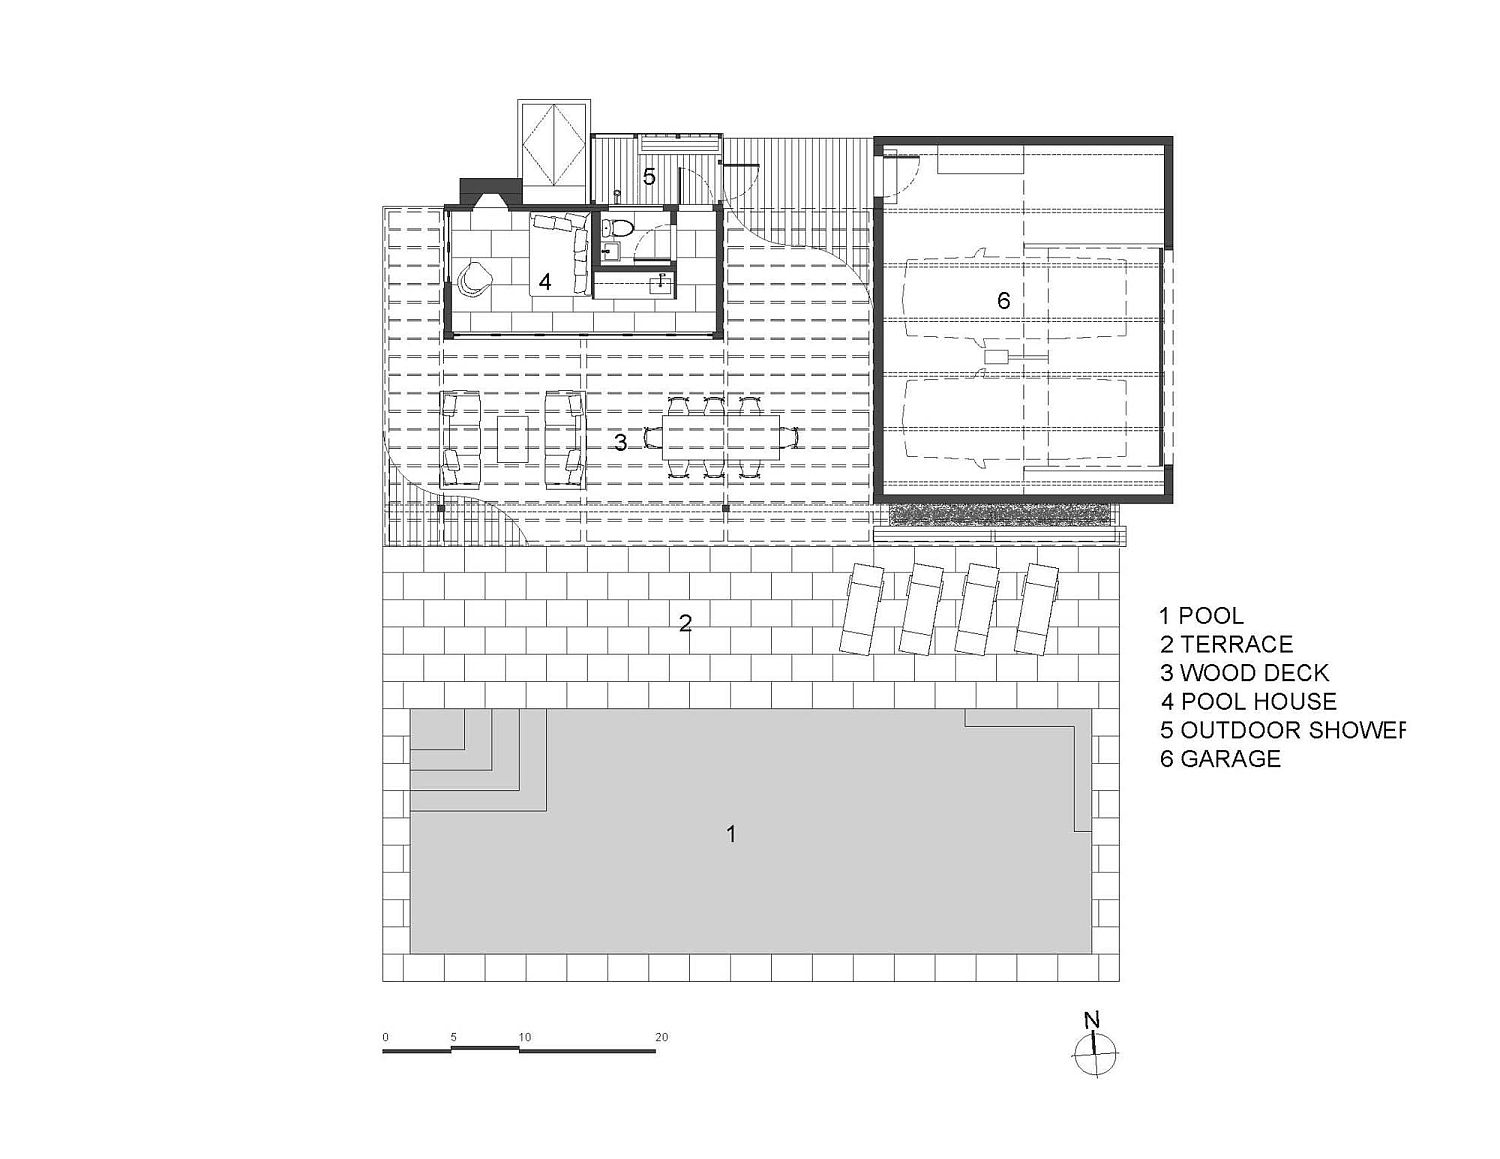 Overall plan and design of the pool house